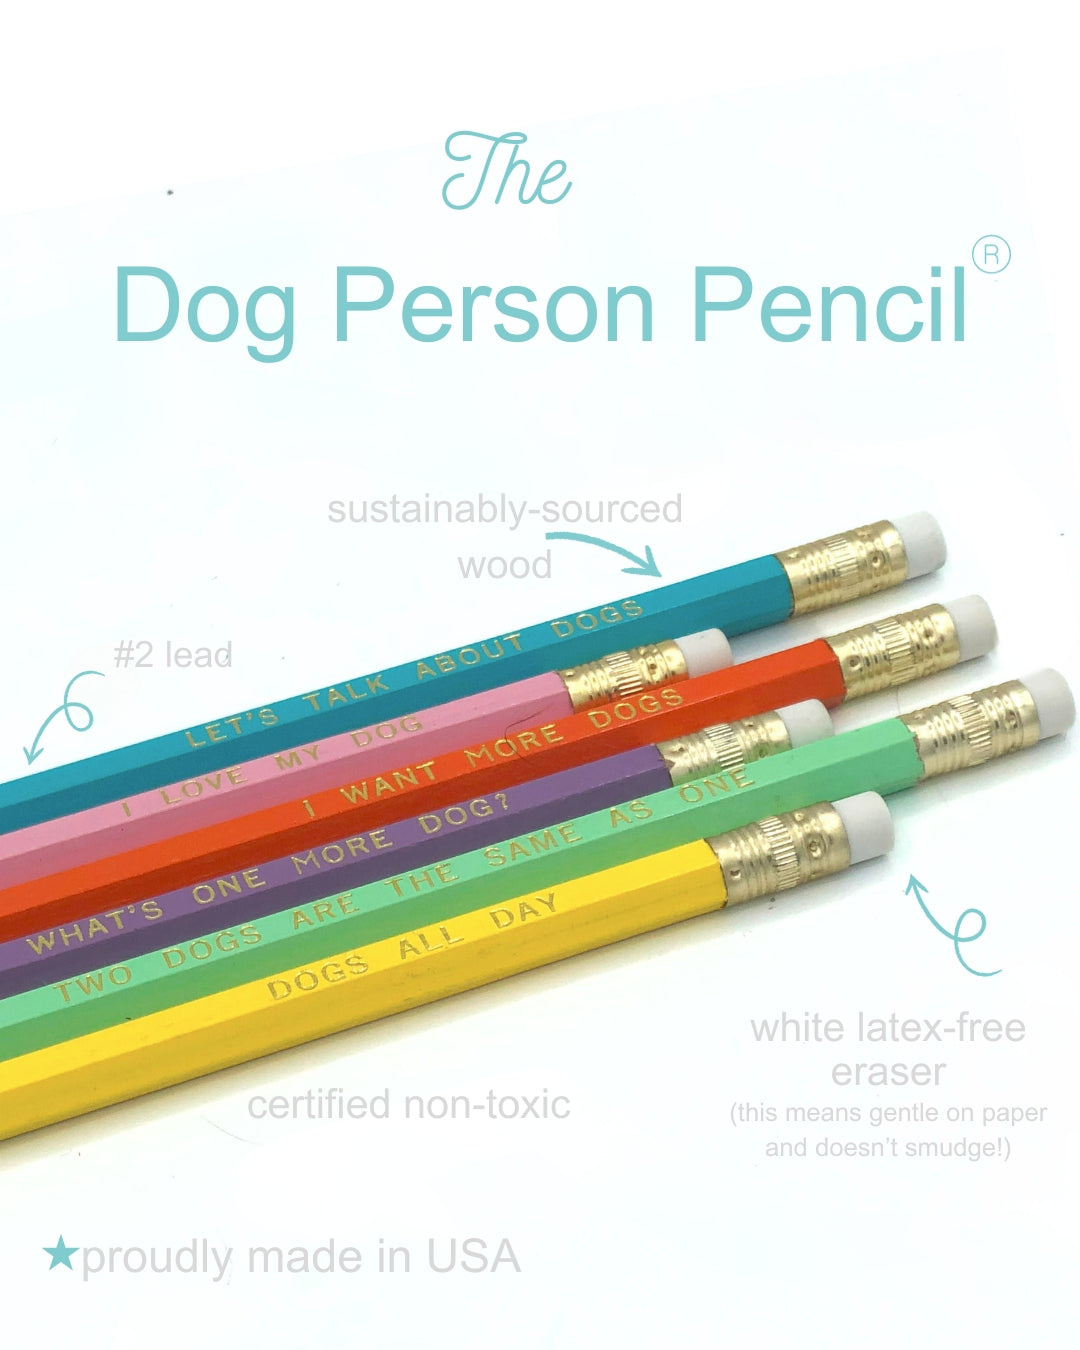 I Love My Dog - The Dog Person Pencil